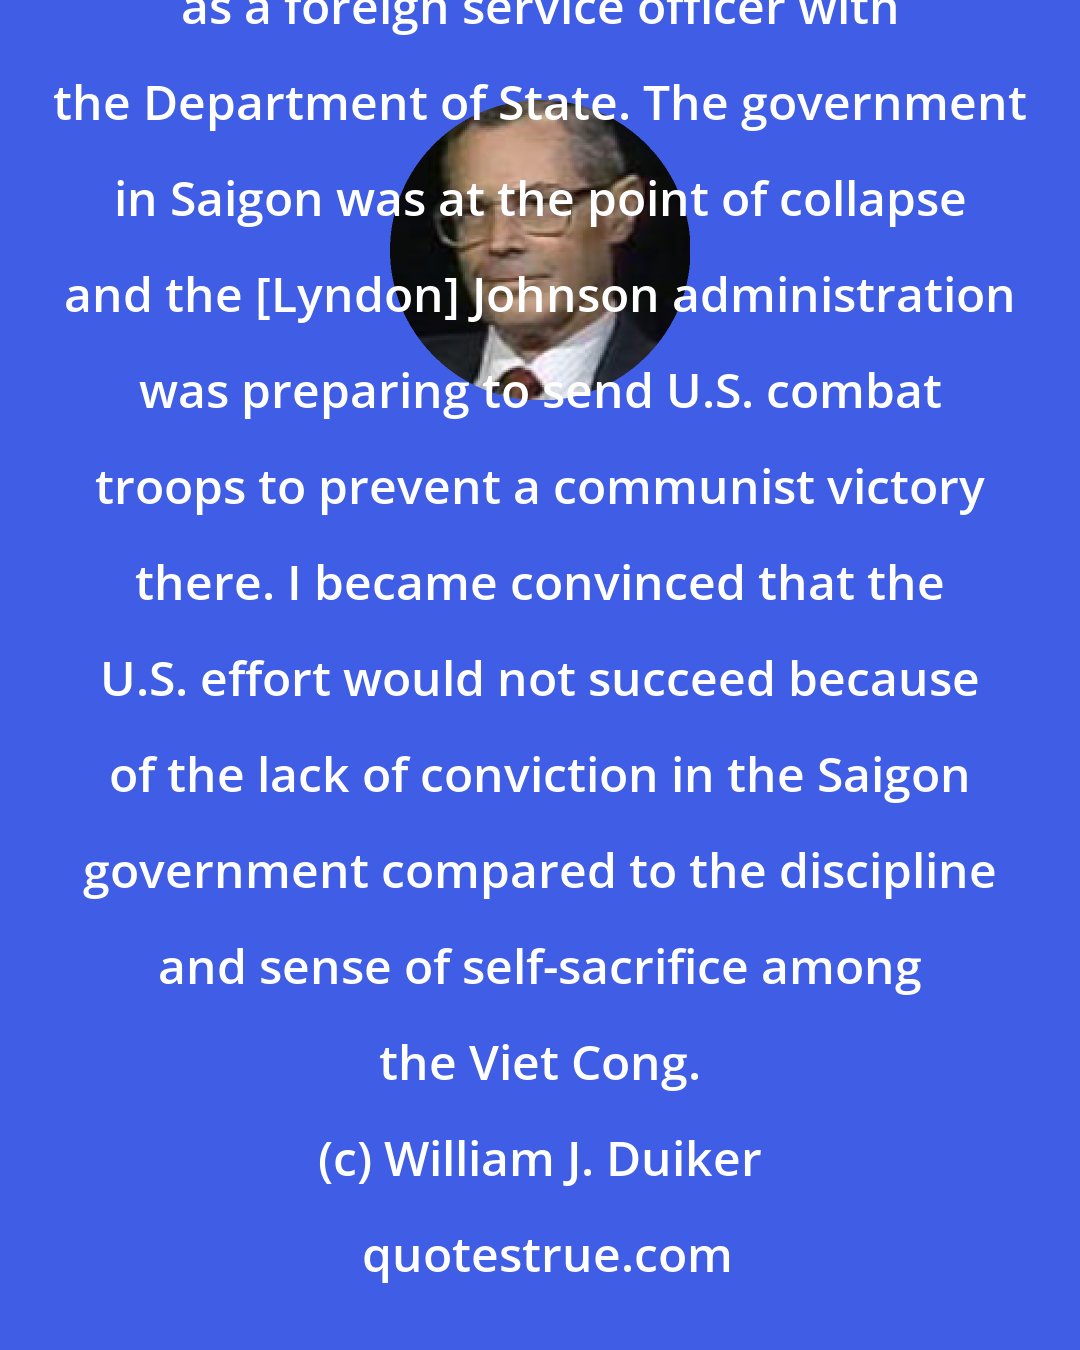 William J. Duiker: I first became interested in Ho Chi Minh in 1964-1965 while I was stationed at the U.S. Embassy in South Vietnam as a foreign service officer with the Department of State. The government in Saigon was at the point of collapse and the [Lyndon] Johnson administration was preparing to send U.S. combat troops to prevent a communist victory there. I became convinced that the U.S. effort would not succeed because of the lack of conviction in the Saigon government compared to the discipline and sense of self-sacrifice among the Viet Cong.